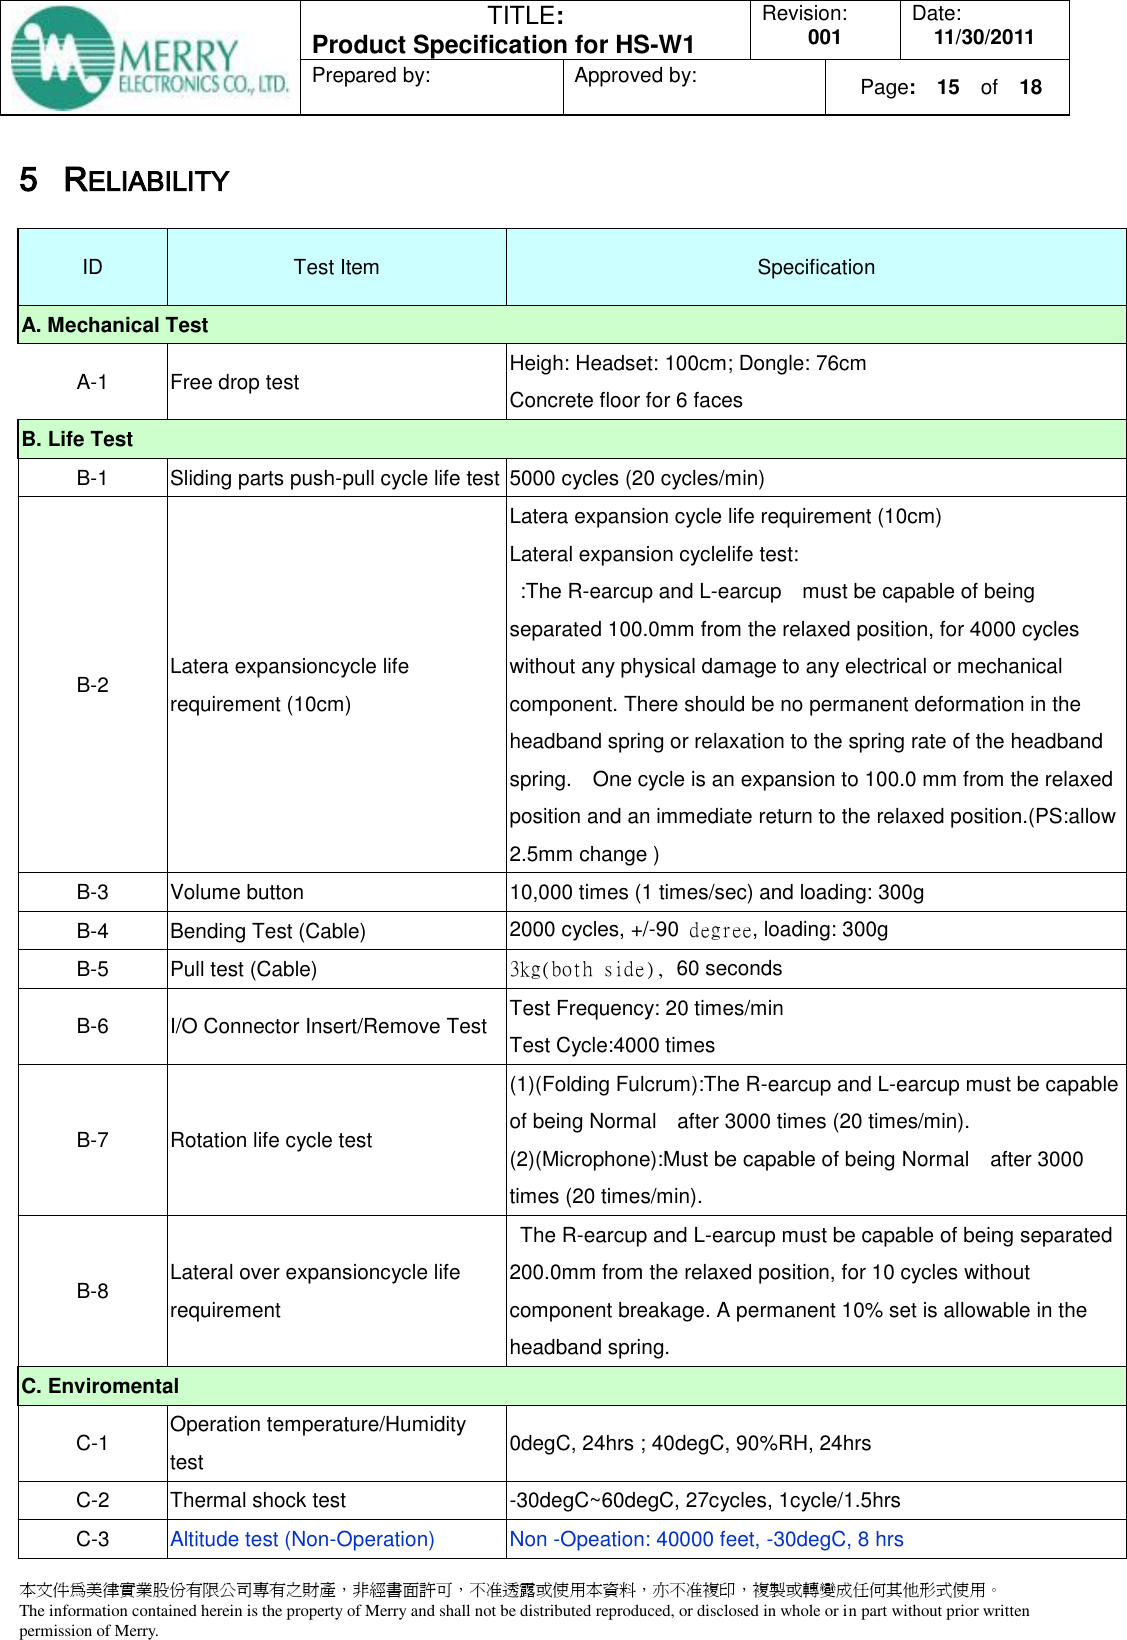  TITLE:  Product Specification for HS-W1 Revision: 001 Date: 11/30/2011 Prepared by:  Approved by:    Page:  15  of    18  本文件為美律實業股份有限公司專有之財產，非經書面許可，不准透露或使用本資料，亦不准複印，複製或轉變成任何其他形式使用。 The information contained herein is the property of Merry and shall not be distributed reproduced, or disclosed in whole or in part without prior written permission of Merry.  5 RELIABILITY ID Test Item Specification A. Mechanical Test   A-1 Free drop test Heigh: Headset: 100cm; Dongle: 76cm Concrete floor for 6 faces B. Life Test   B-1 Sliding parts push-pull cycle life test 5000 cycles (20 cycles/min) B-2 Latera expansioncycle life requirement (10cm) Latera expansion cycle life requirement (10cm) Lateral expansion cyclelife test:   :The R-earcup and L-earcup    must be capable of being separated 100.0mm from the relaxed position, for 4000 cycles without any physical damage to any electrical or mechanical component. There should be no permanent deformation in the headband spring or relaxation to the spring rate of the headband spring.    One cycle is an expansion to 100.0 mm from the relaxed position and an immediate return to the relaxed position.(PS:allow 2.5mm change ) B-3 Volume button 10,000 times (1 times/sec) and loading: 300g B-4 Bending Test (Cable) 2000 cycles, +/-90 degree, loading: 300g B-5 Pull test (Cable) 3kg(both side), 60 seconds B-6 I/O Connector Insert/Remove Test Test Frequency: 20 times/min   Test Cycle:4000 times B-7 Rotation life cycle test (1)(Folding Fulcrum):The R-earcup and L-earcup must be capable of being Normal    after 3000 times (20 times/min). (2)(Microphone):Must be capable of being Normal    after 3000 times (20 times/min). B-8 Lateral over expansioncycle life requirement   The R-earcup and L-earcup must be capable of being separated 200.0mm from the relaxed position, for 10 cycles without component breakage. A permanent 10% set is allowable in the headband spring. C. Enviromental   C-1 Operation temperature/Humidity test 0degC, 24hrs ; 40degC, 90%RH, 24hrs C-2 Thermal shock test -30degC~60degC, 27cycles, 1cycle/1.5hrs C-3 Altitude test (Non-Operation) Non -Opeation: 40000 feet, -30degC, 8 hrs 